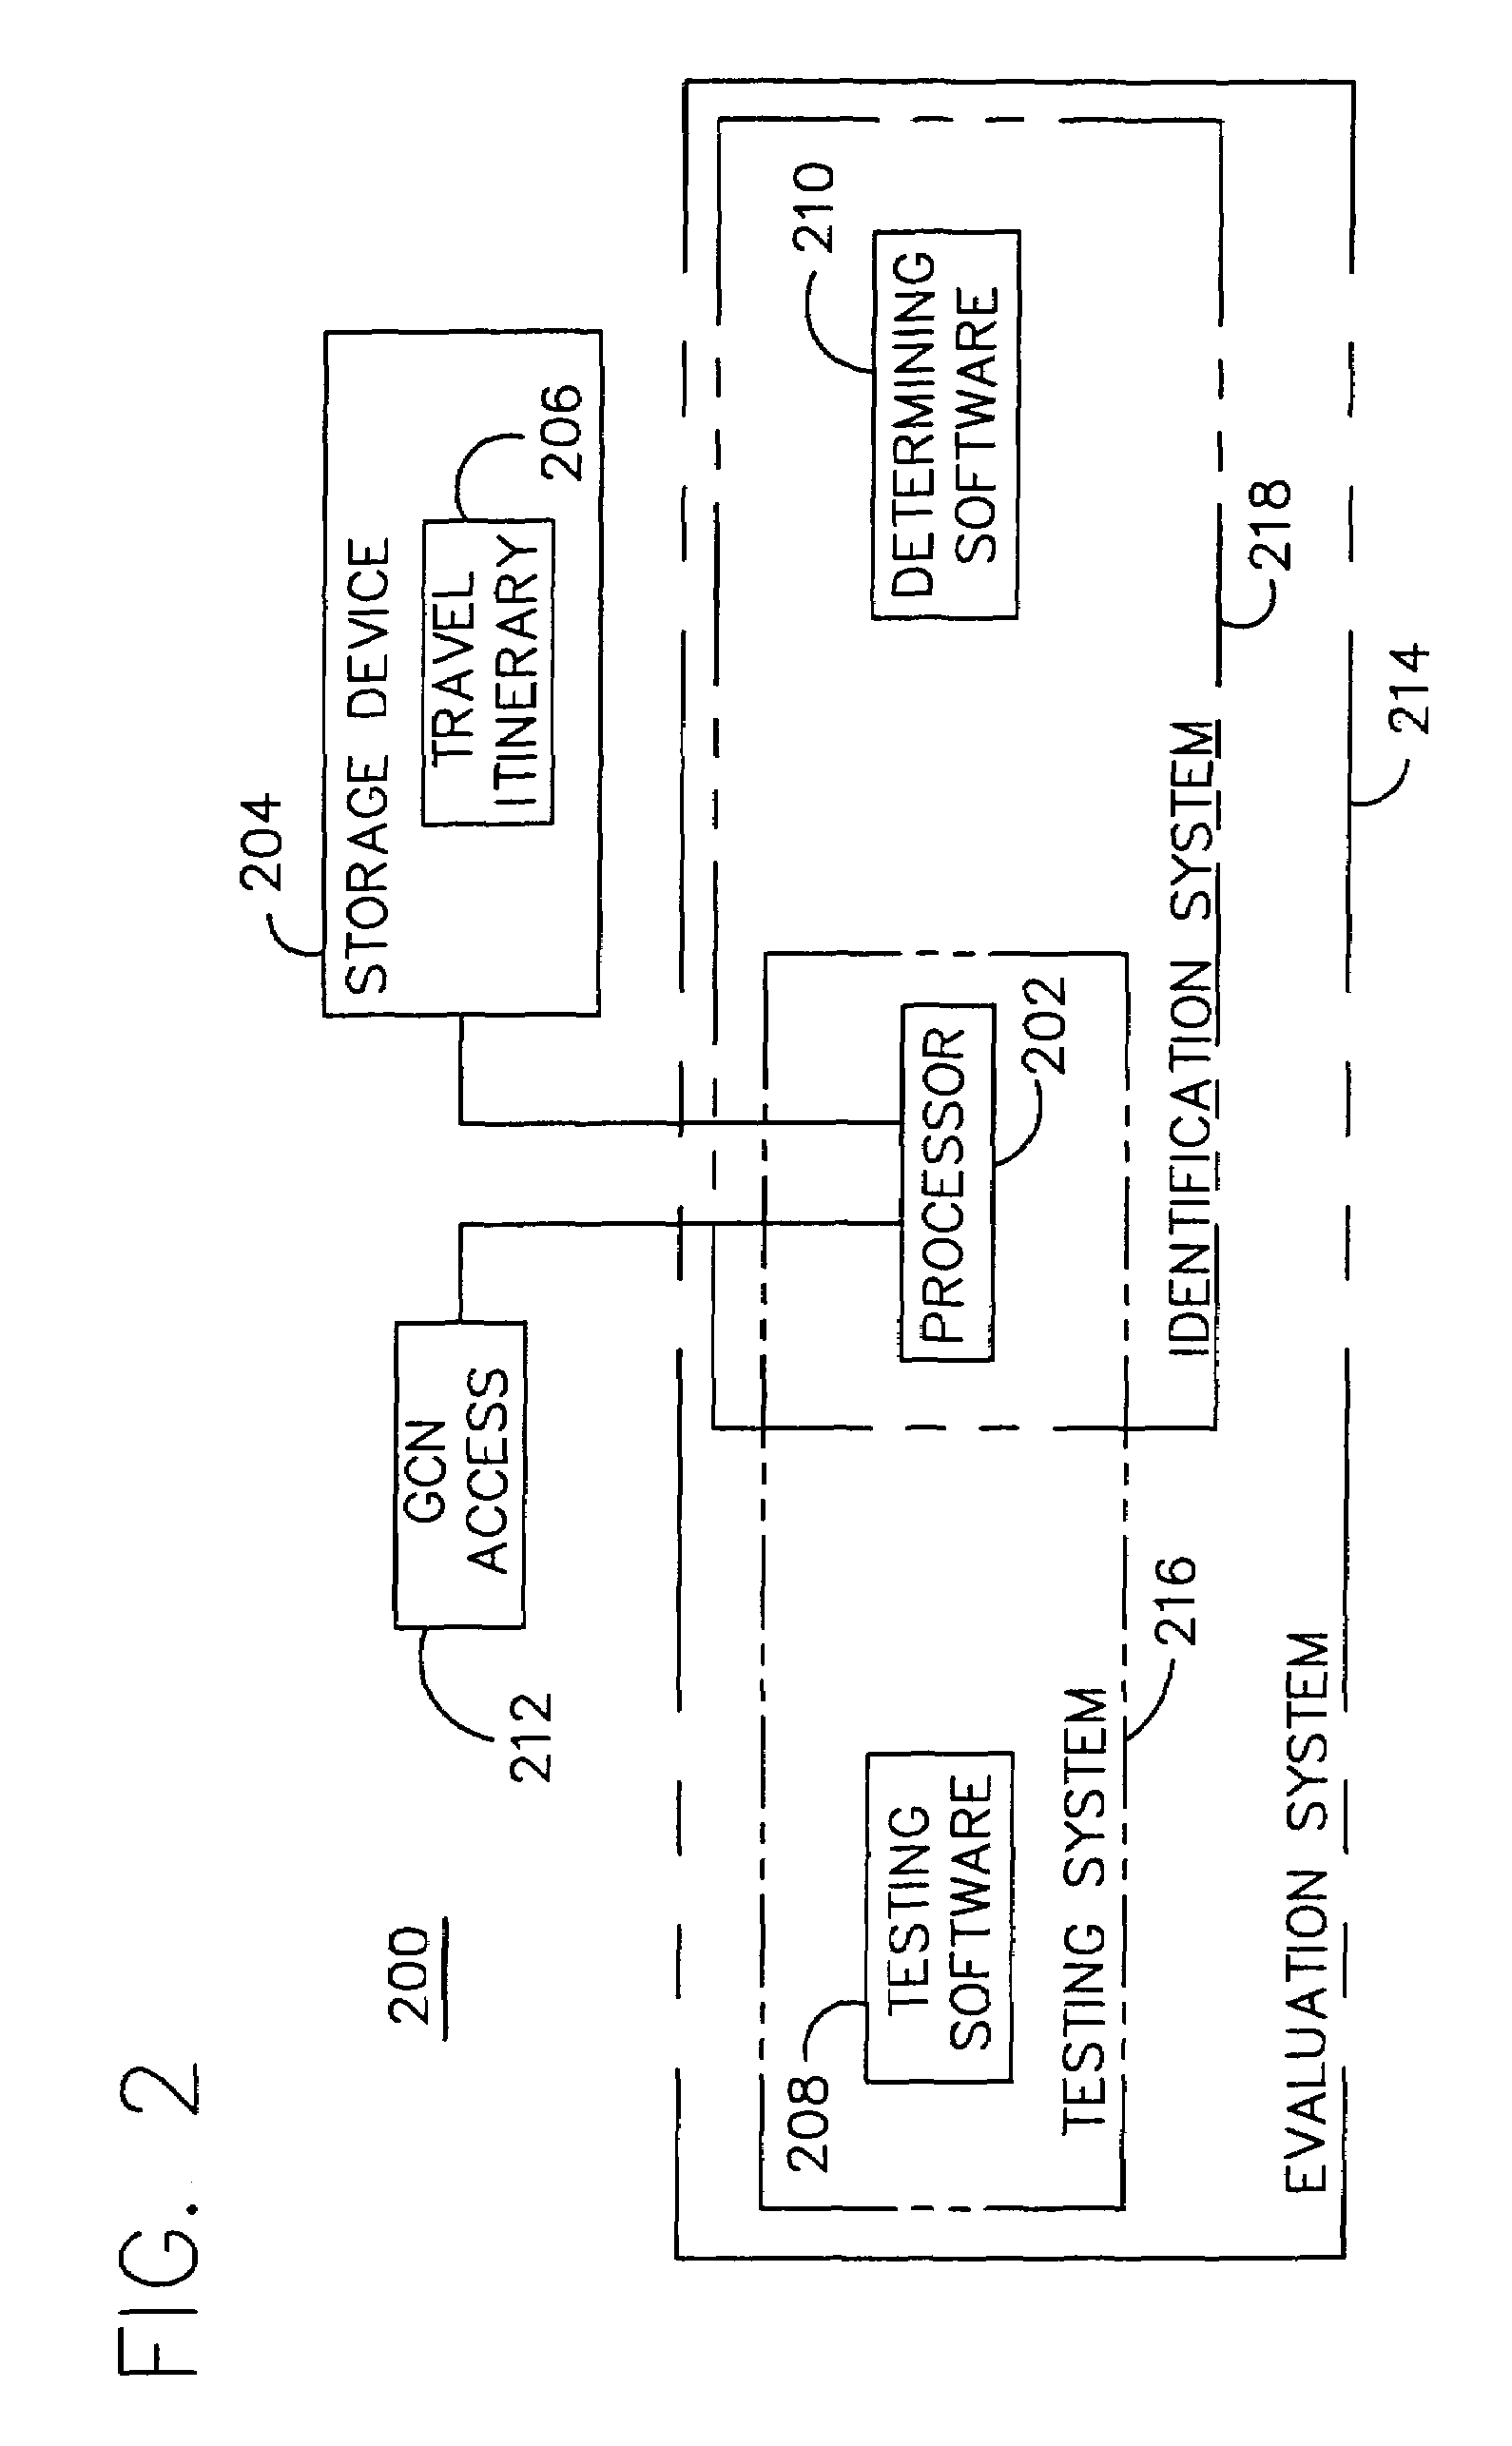 System and method for determining the origin and destination services of a travel itinerary